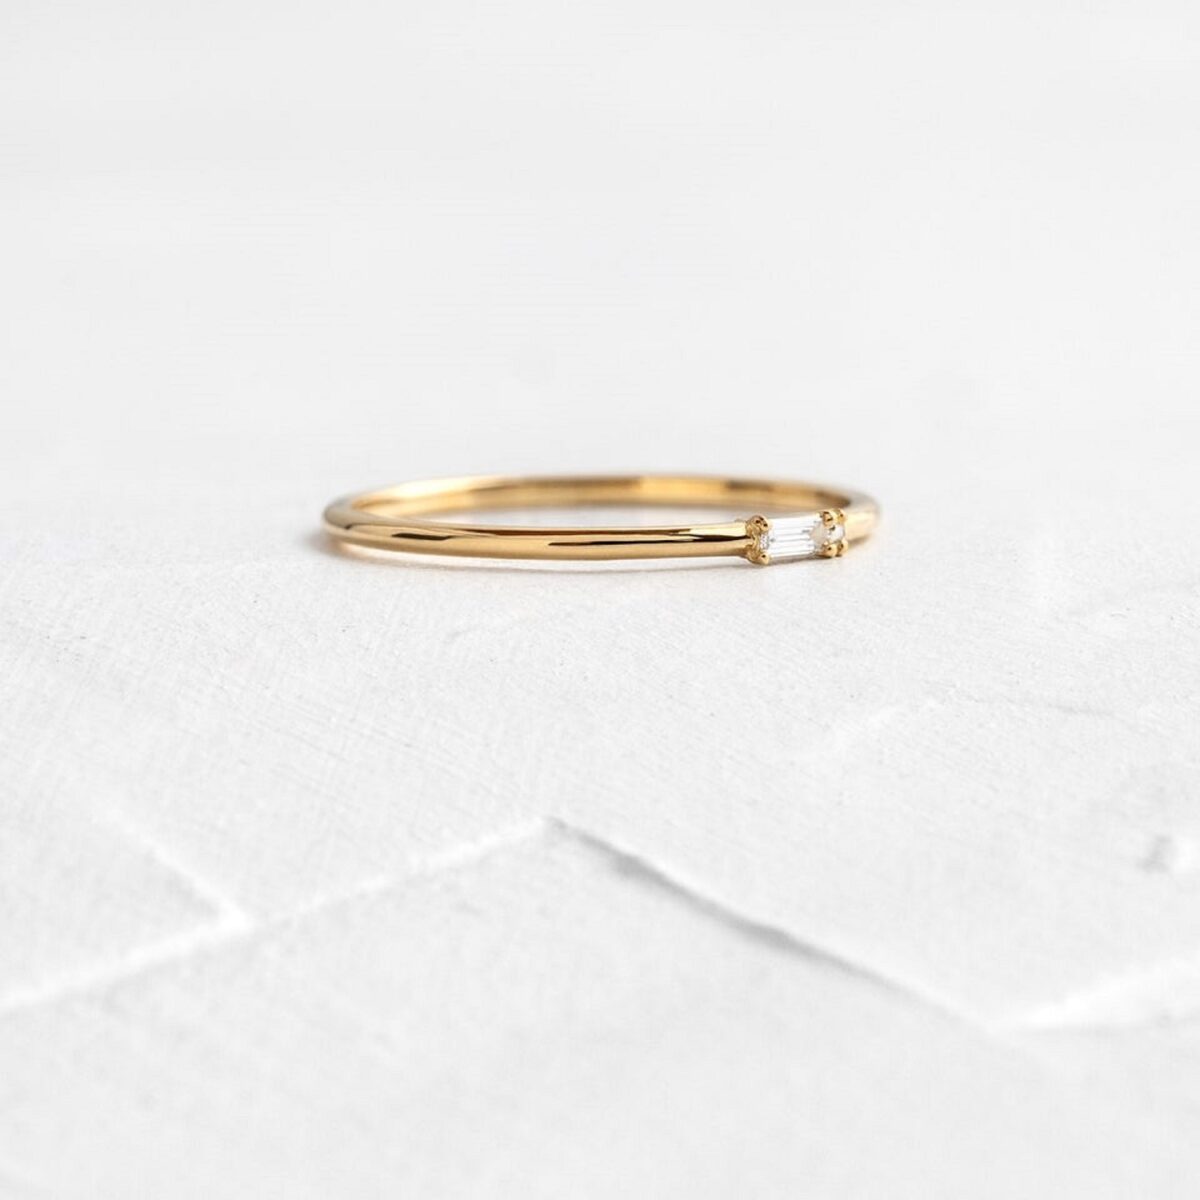 Baguette cut lab grown diamond ring crafted in solid 14k yellow gold.